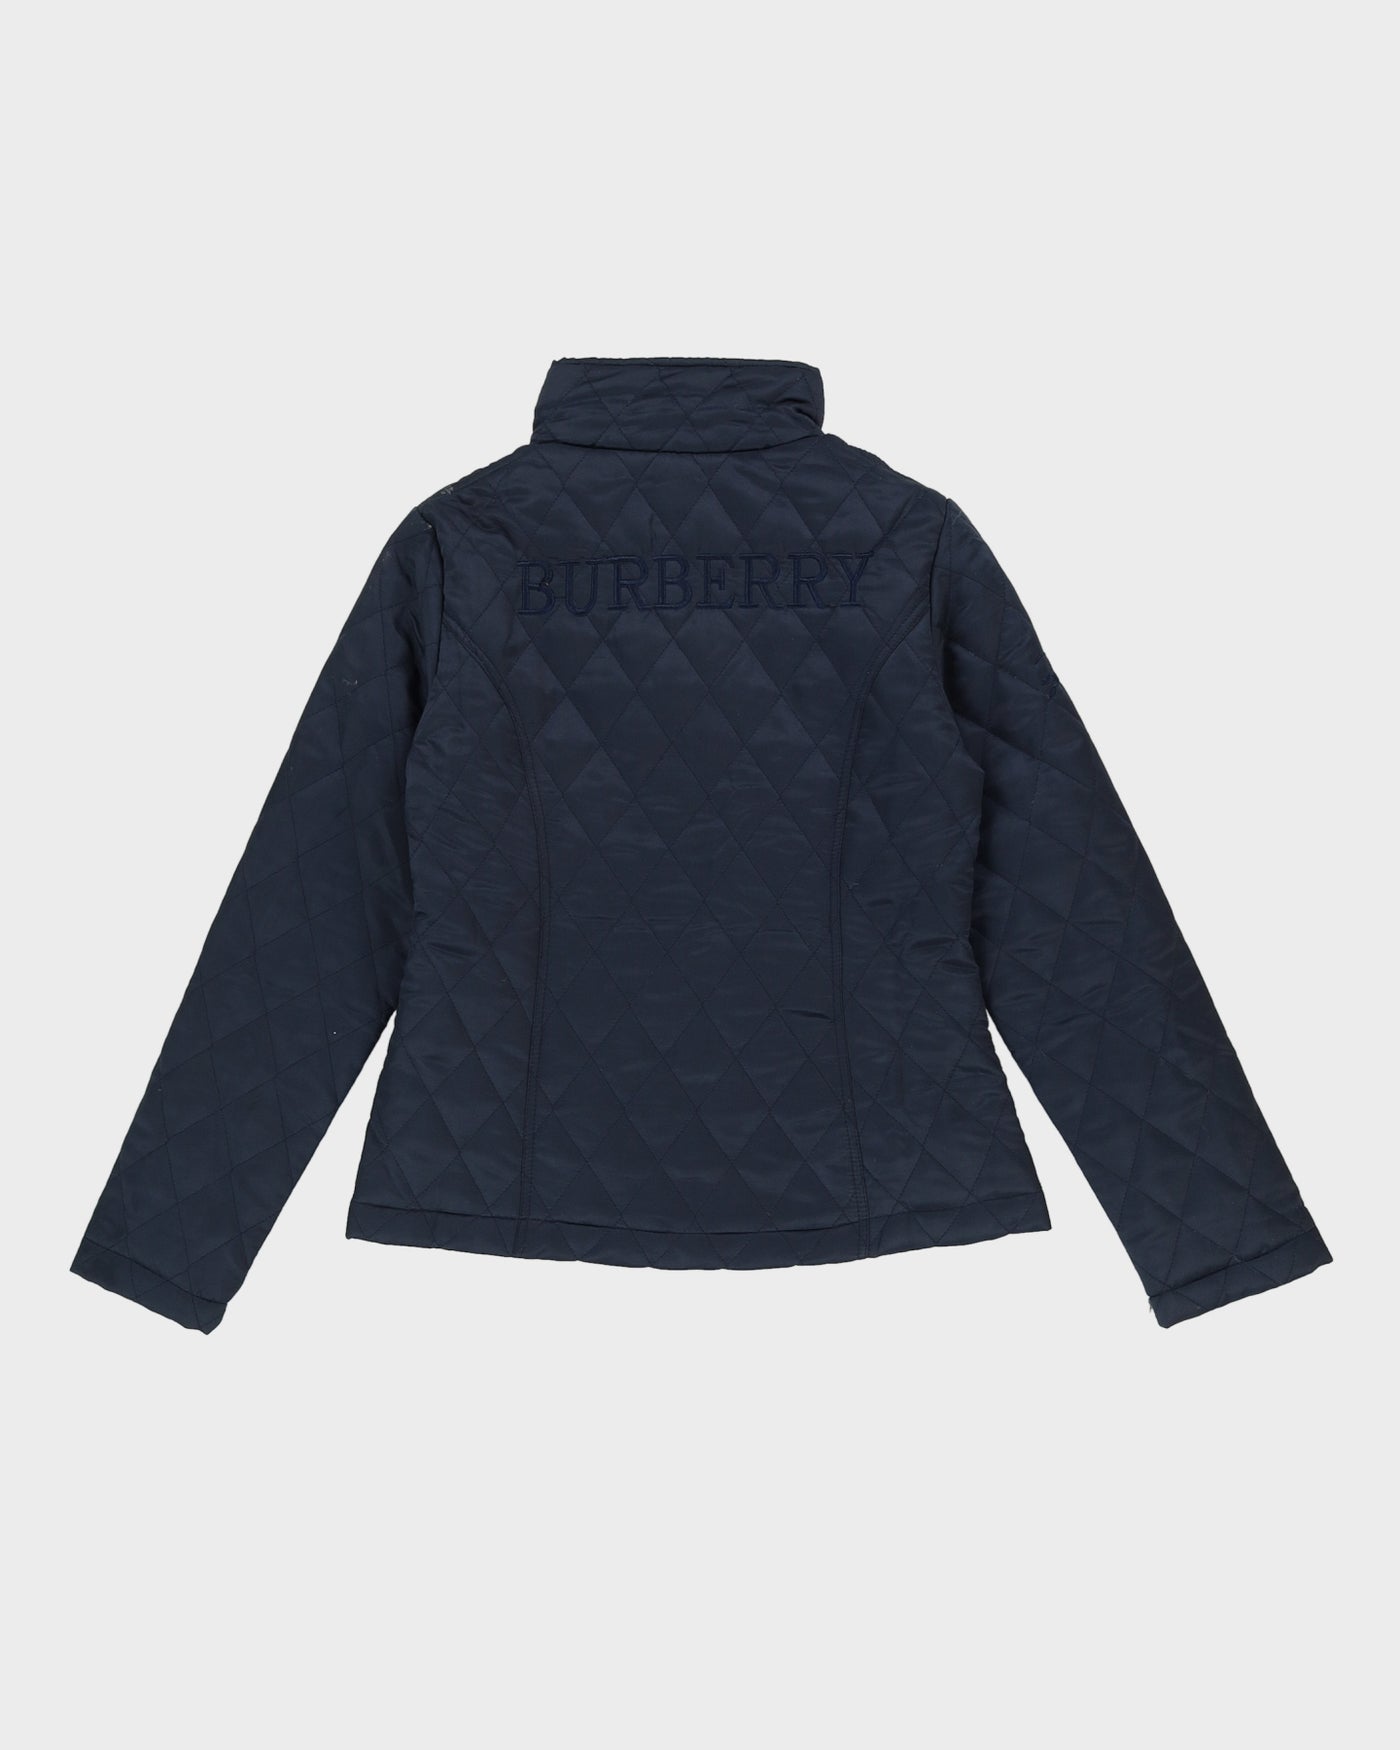 Burberry Navy Blue Quilted Jacket - XXS